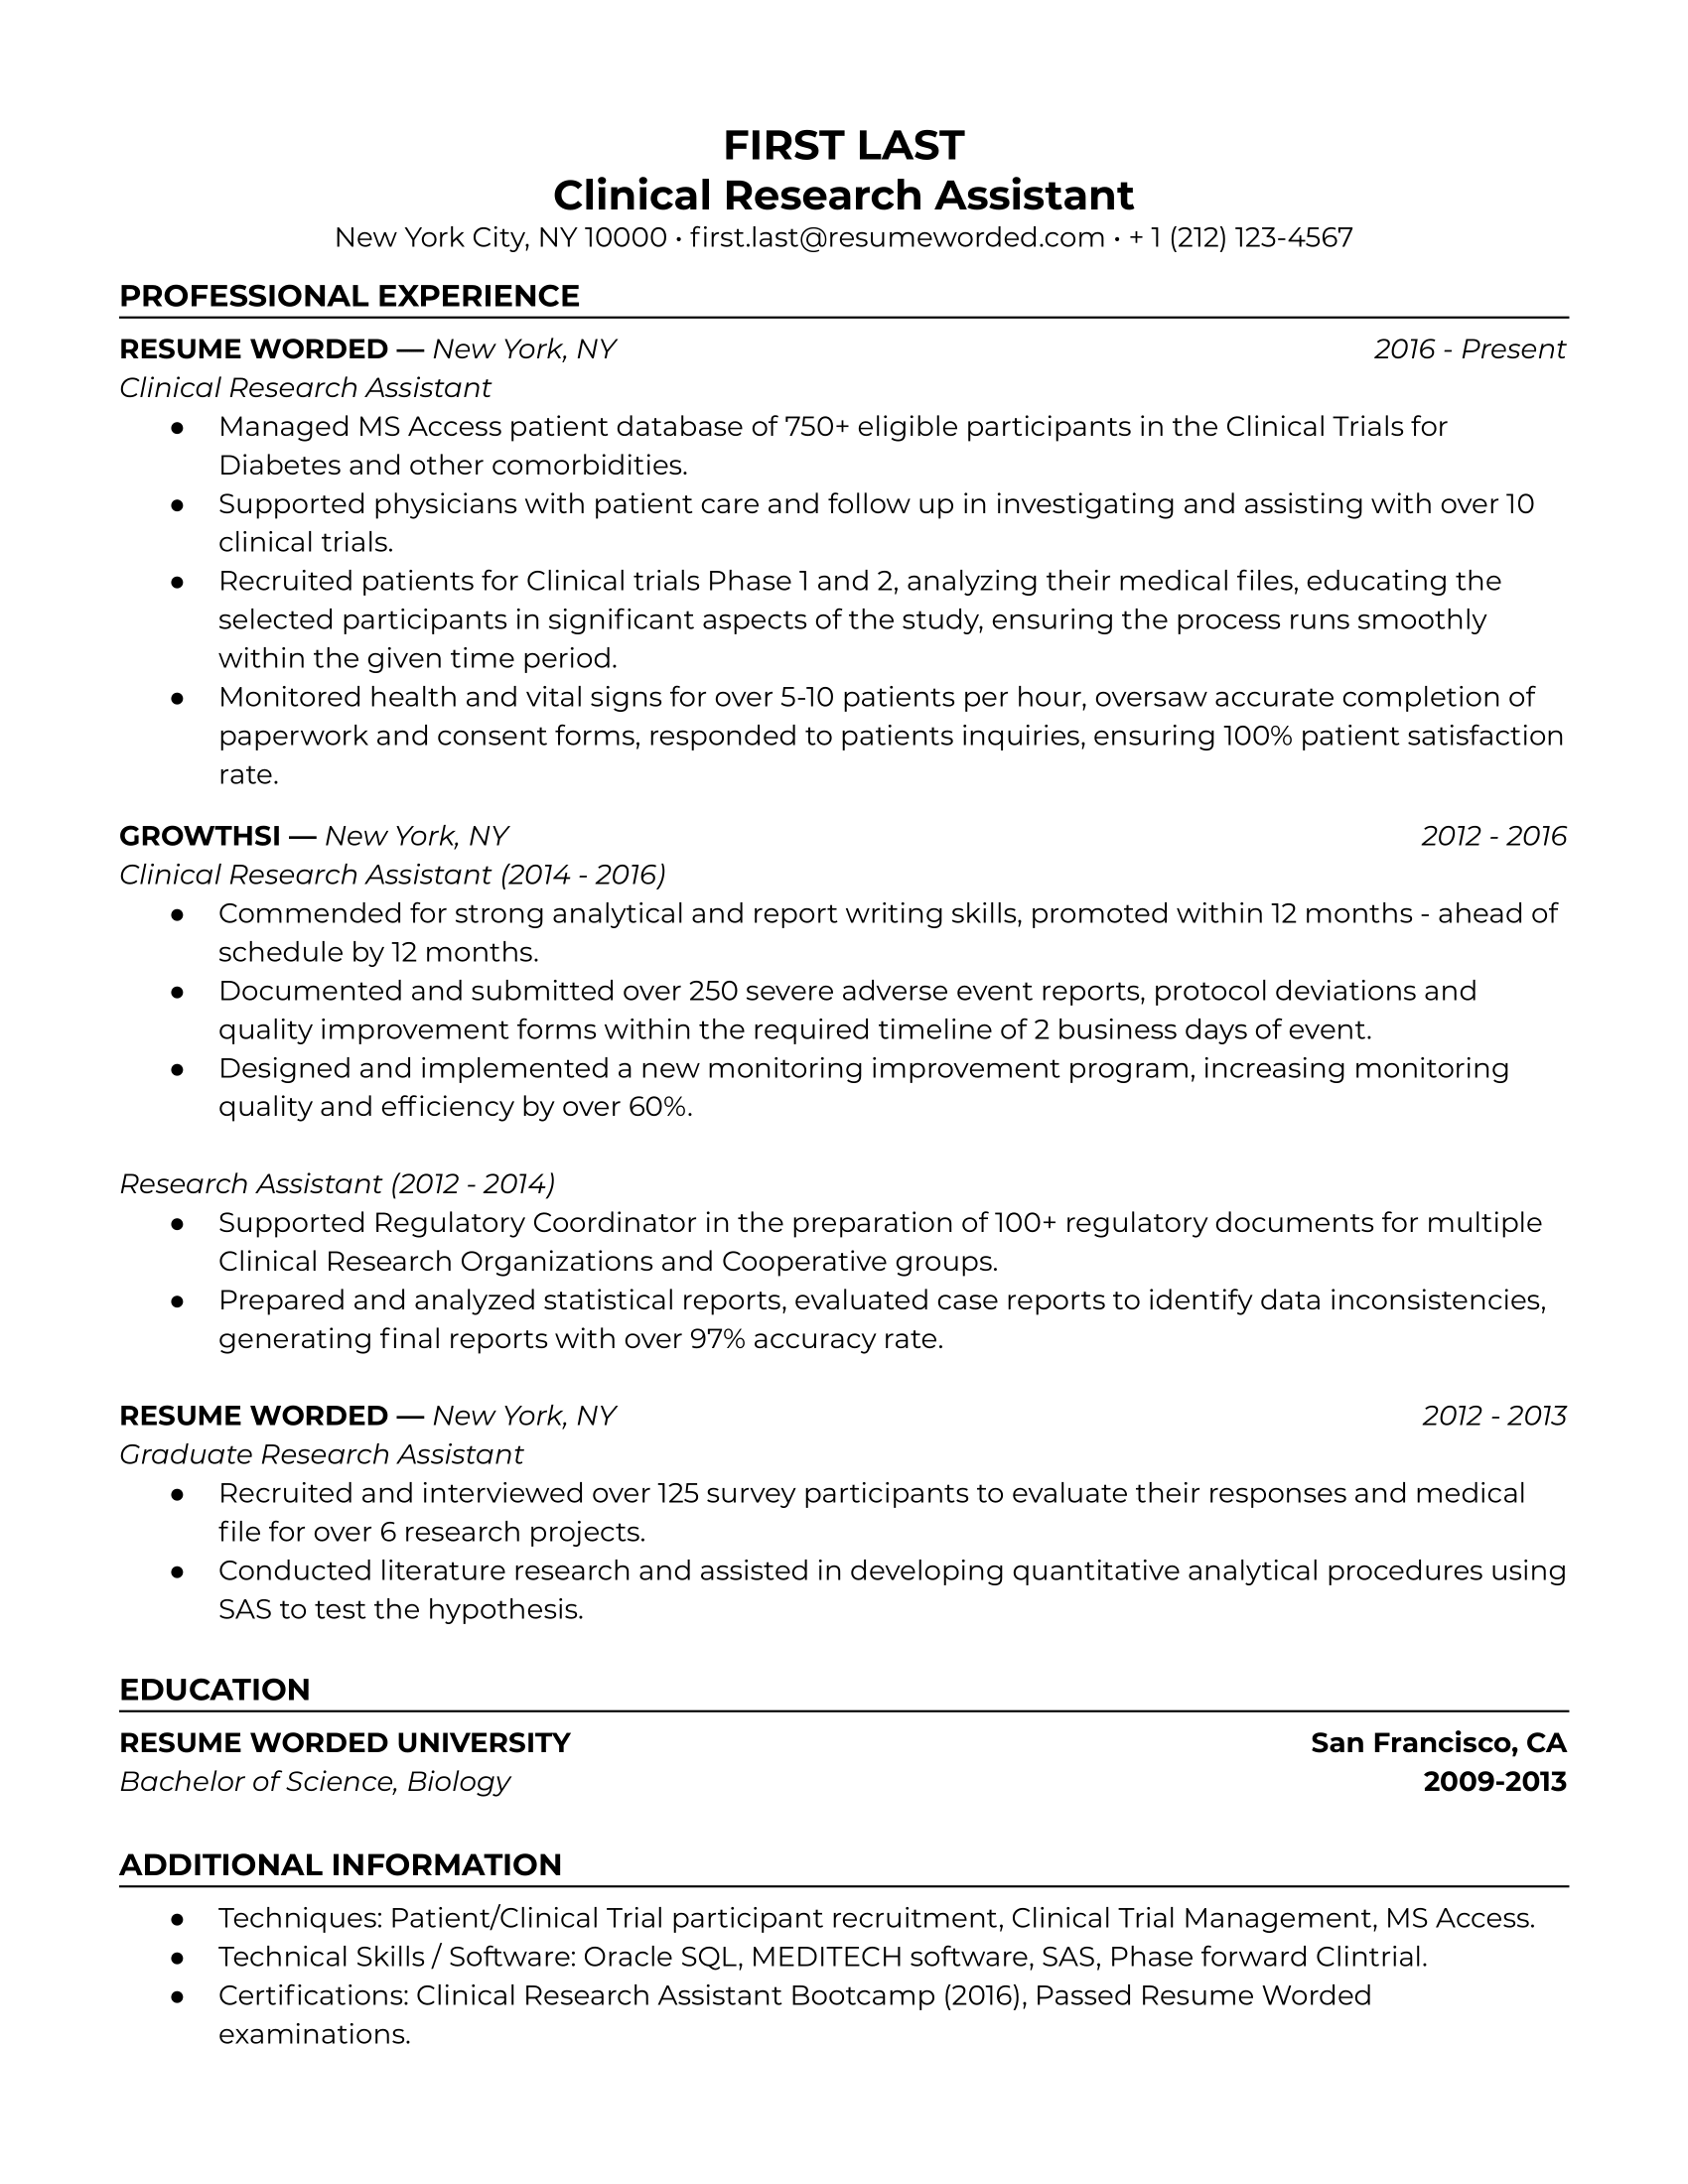 Clinical Research Assistant Resume Template + Example